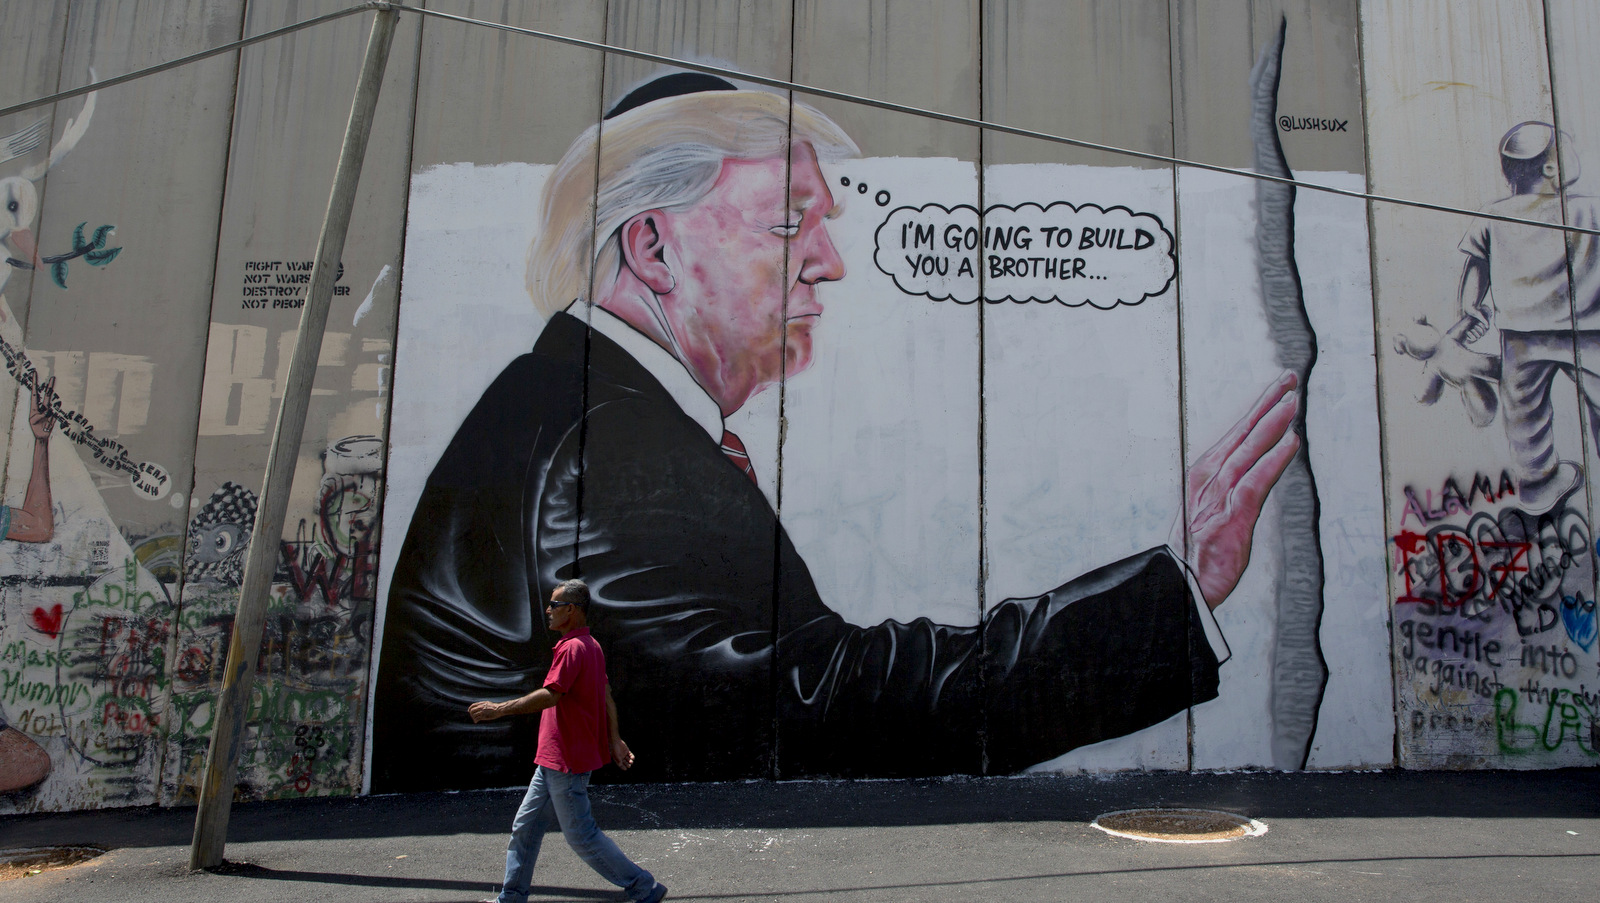 A mural resembling the work of elusive artist Banksy depicting President Donald Trump wearing a Jewish skullcap, is seen on Israel's West Bank apartheid wall in the West Bank city of Bethlehem, Aug. 4, 2017. (AP/Nasser Nasser)